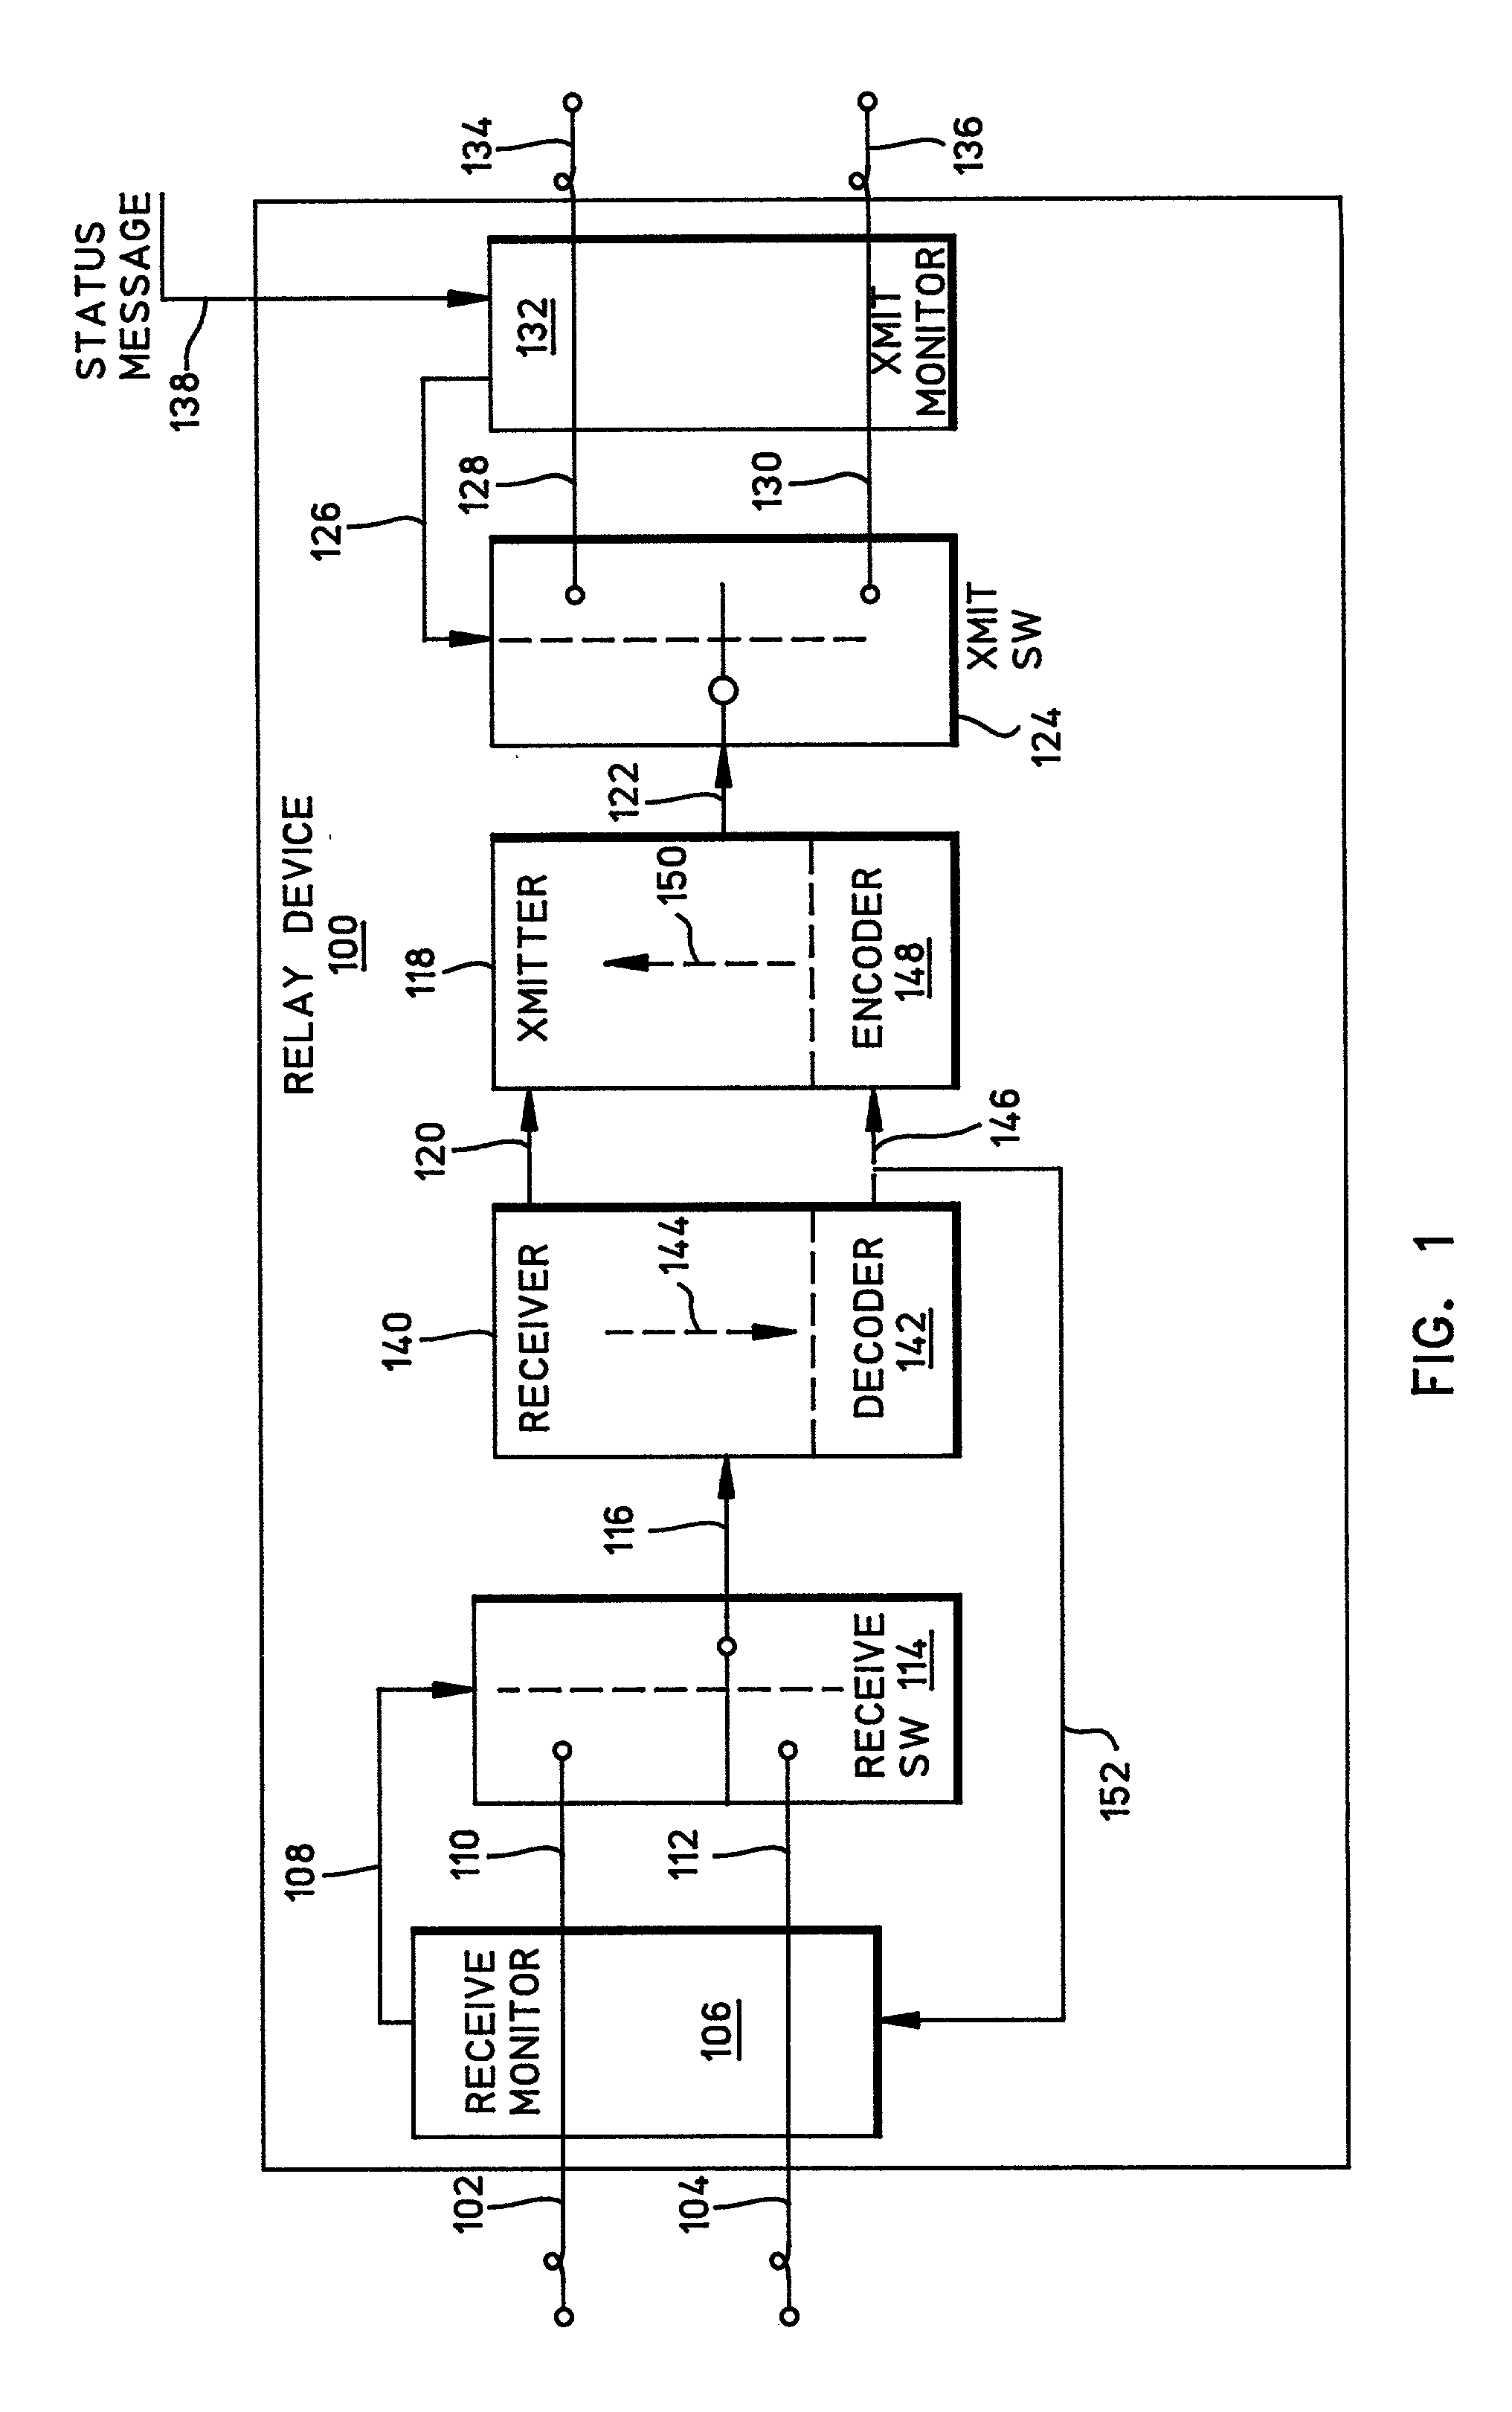 System and method for redundant path connections in digital communications network